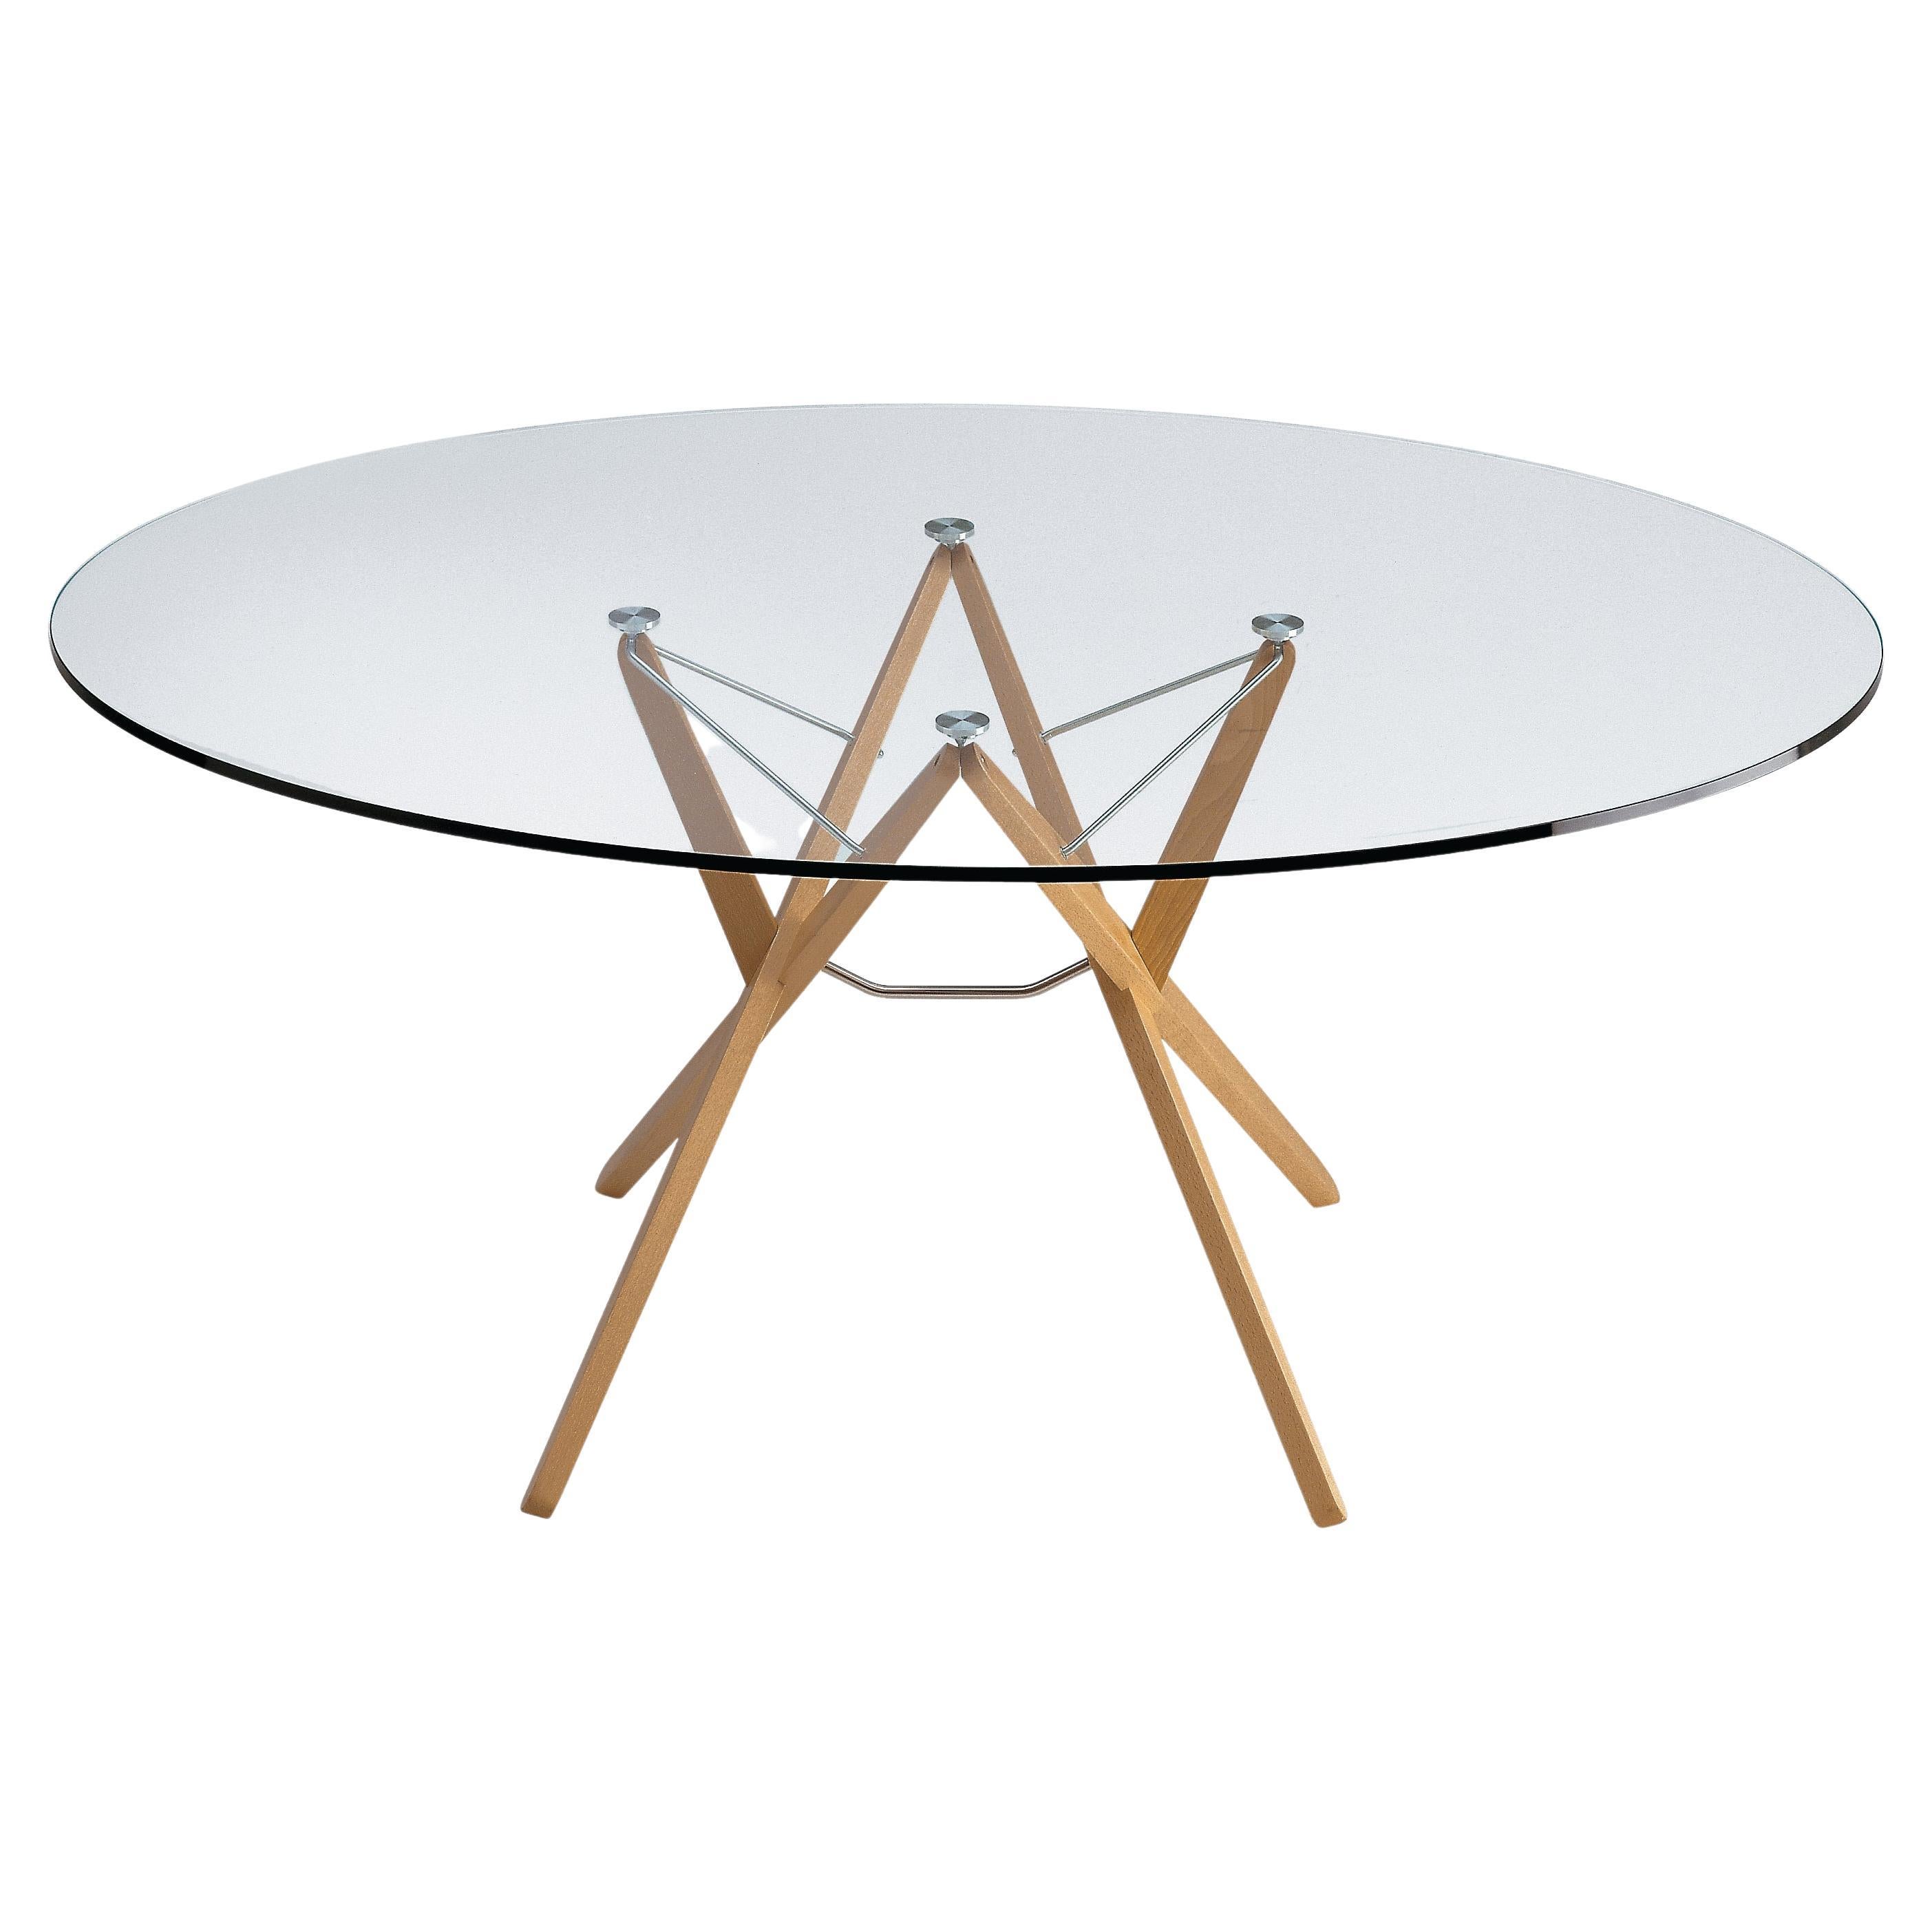 Zanotta Small Orione Table in Plate Glass Top with Natural Oak Frame